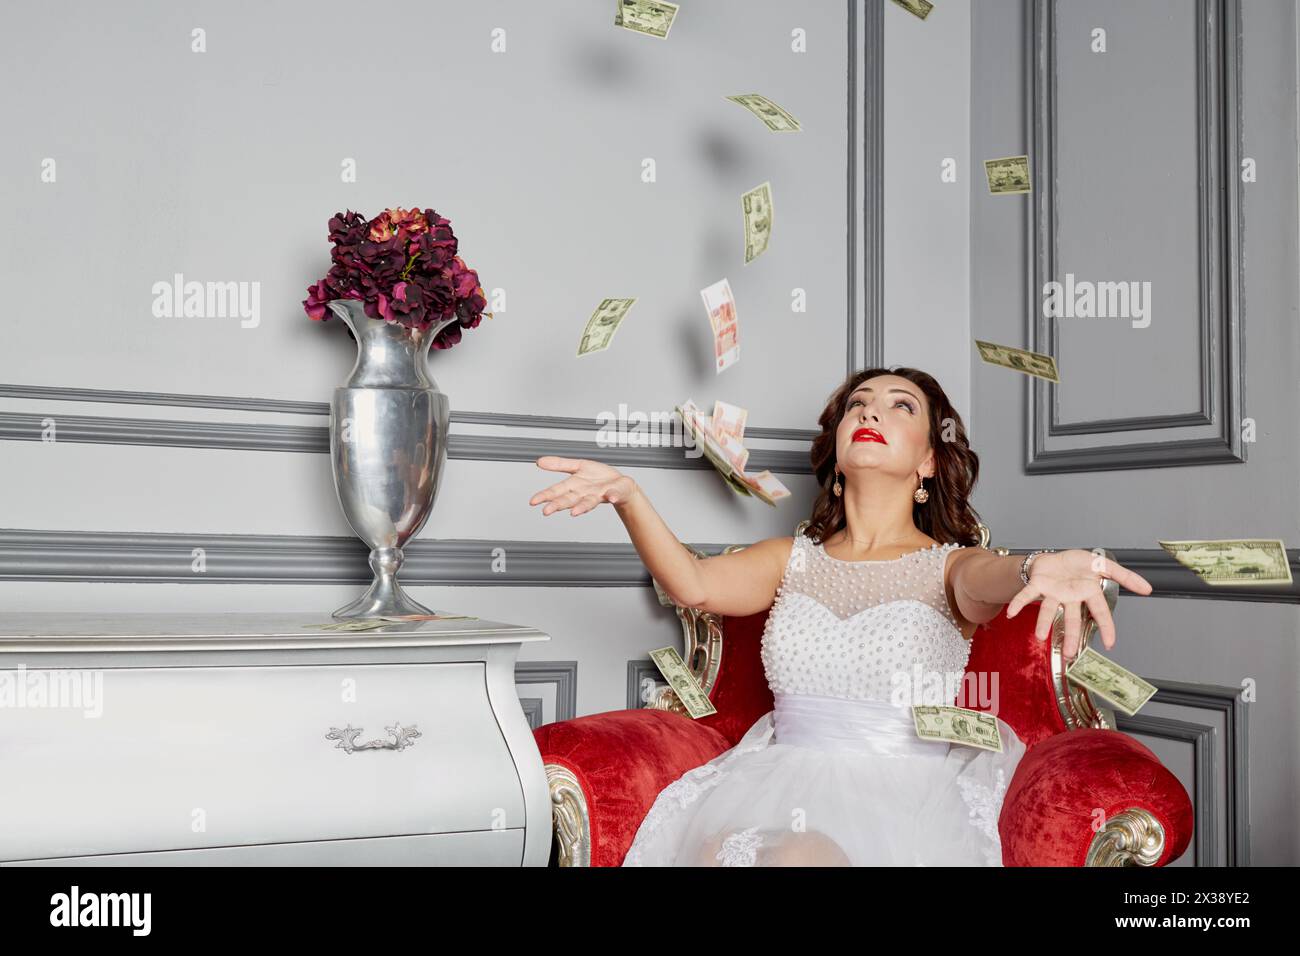 Woman in white dress sits in armchair at room under money banknotes shower. Stock Photo